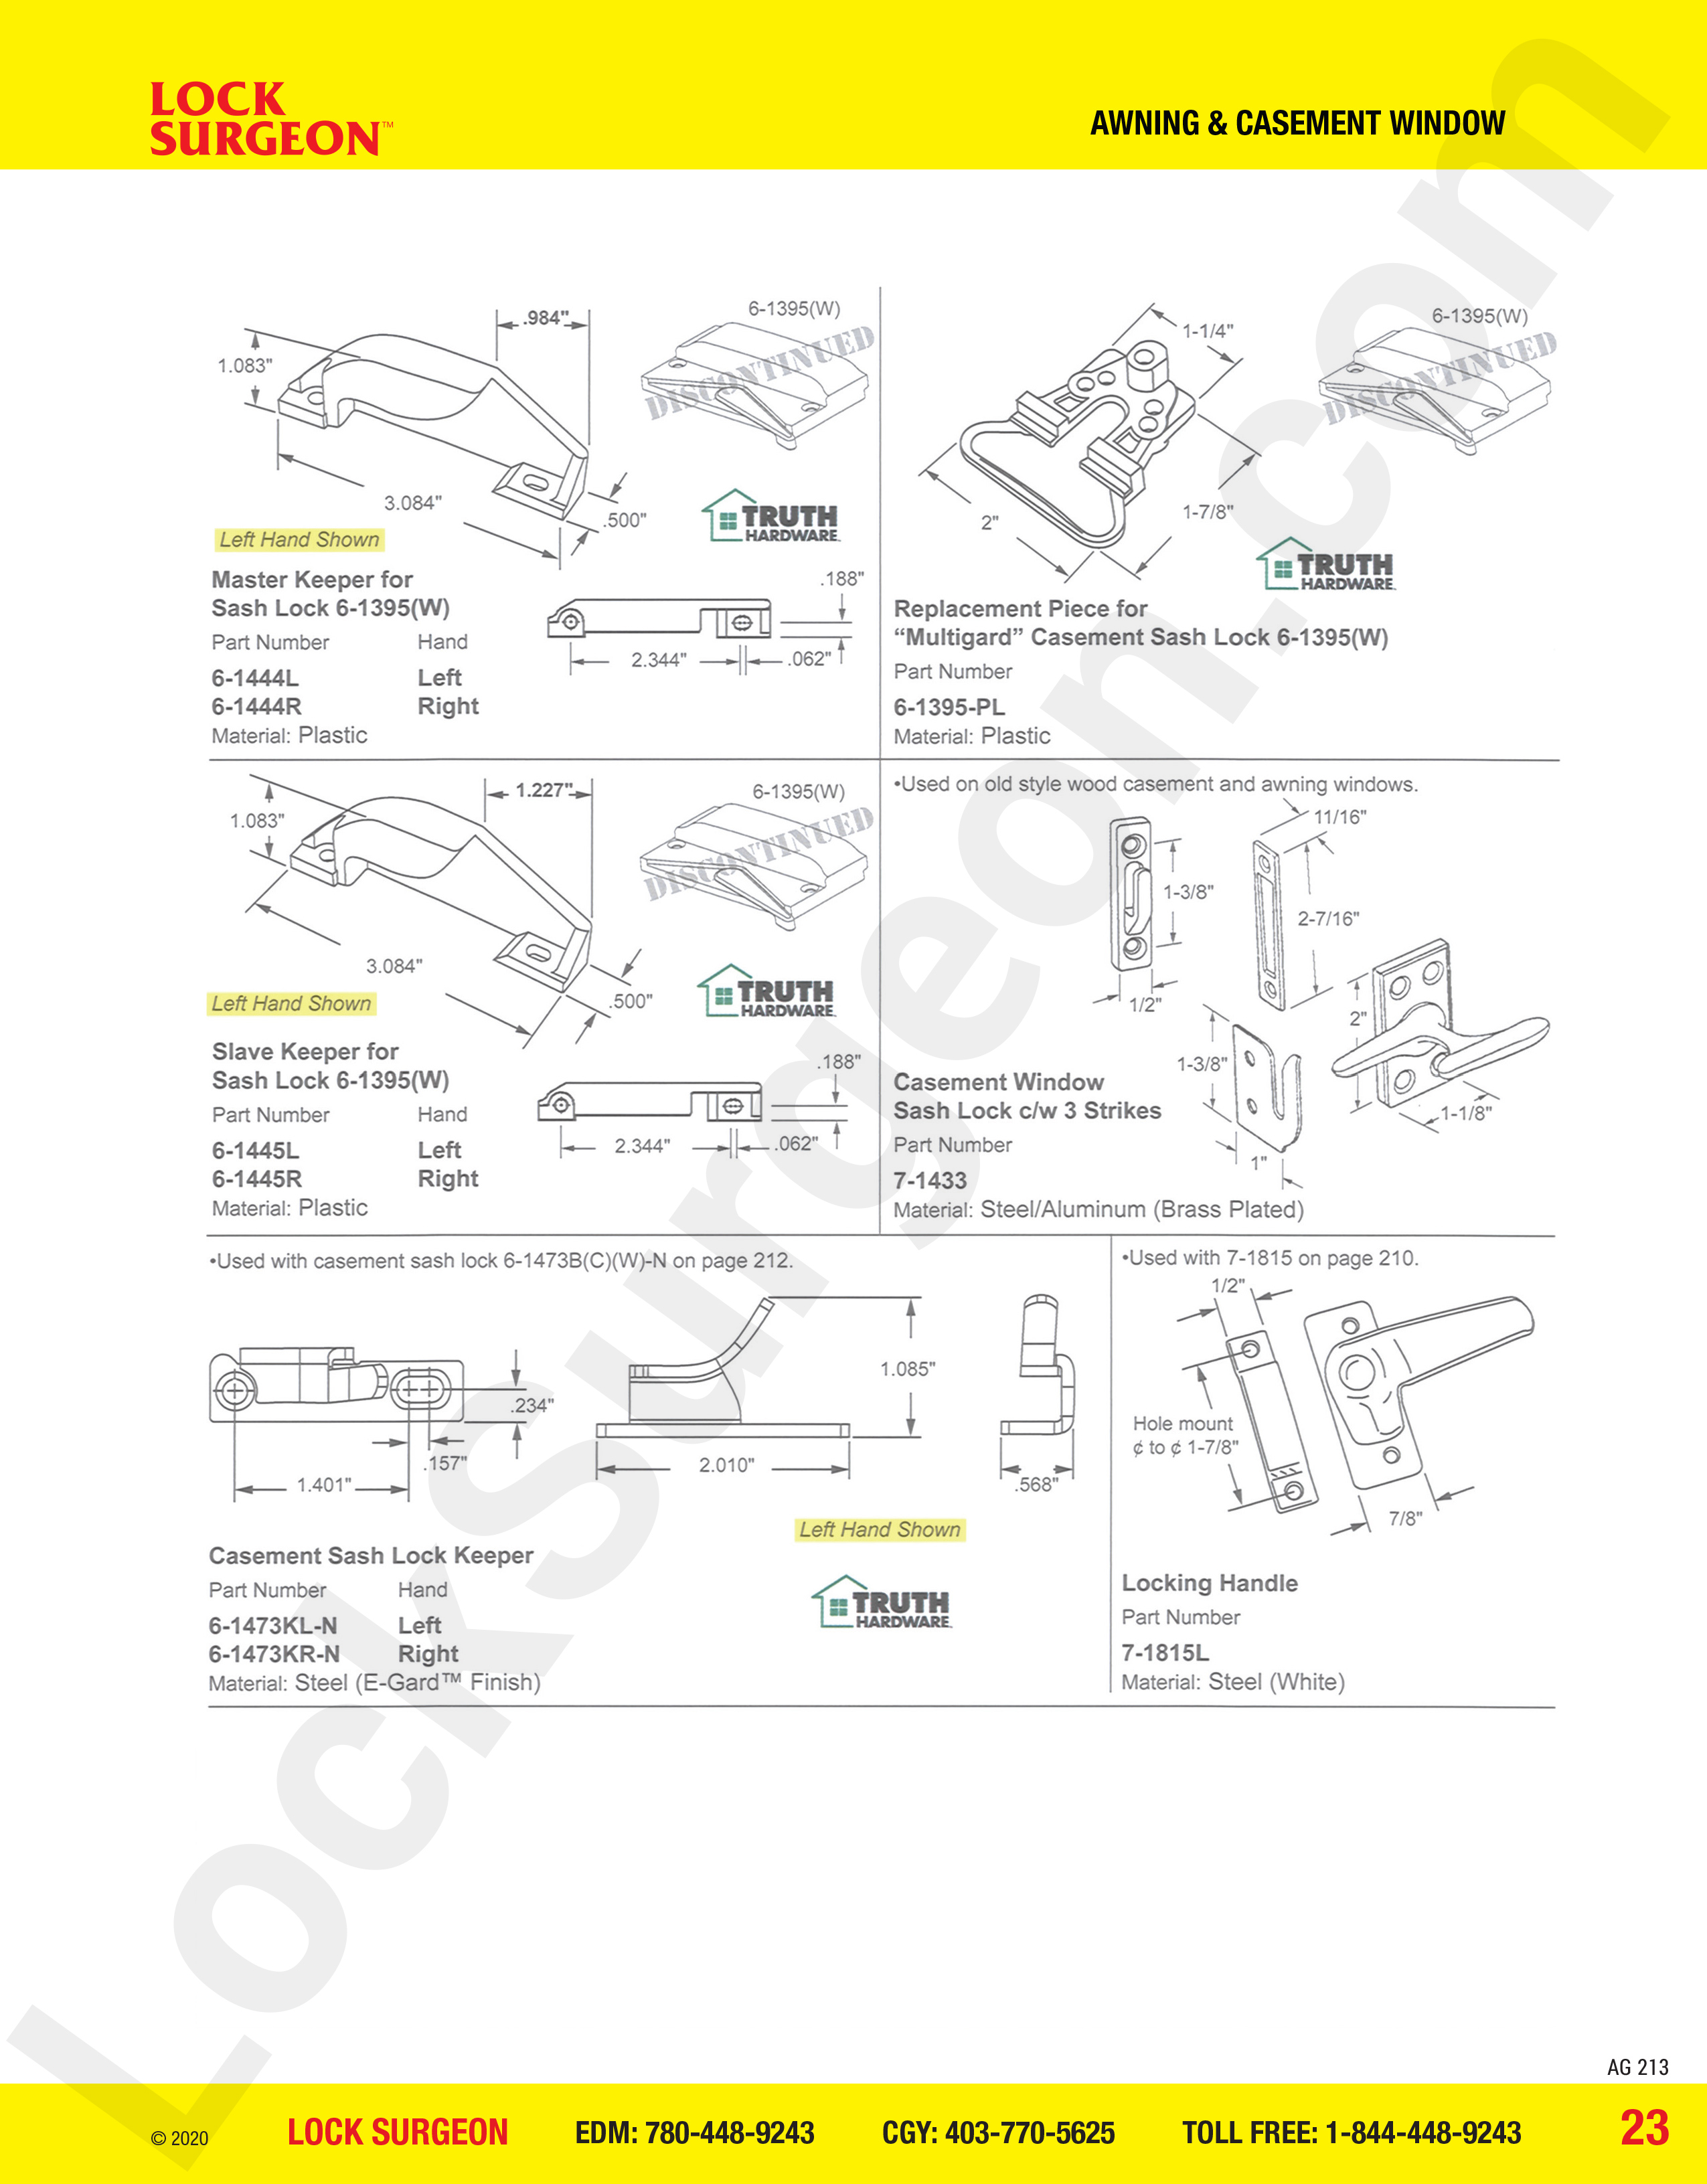 awning and casement window parts for sash locks.